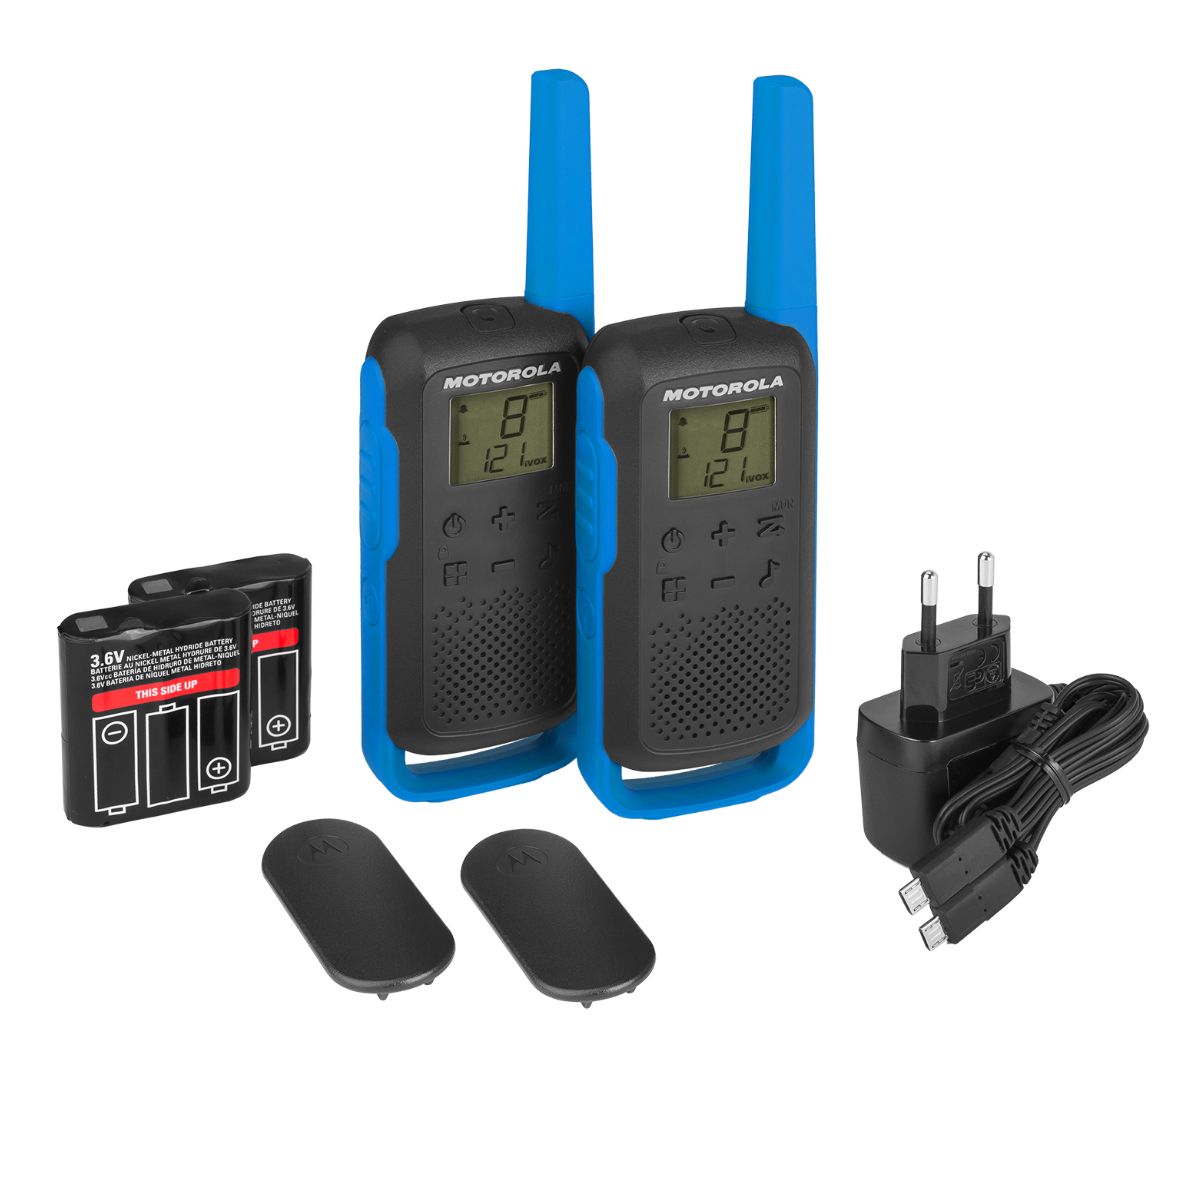 4 Walkie Talkie Motorola T82 With Chargers Batteries And